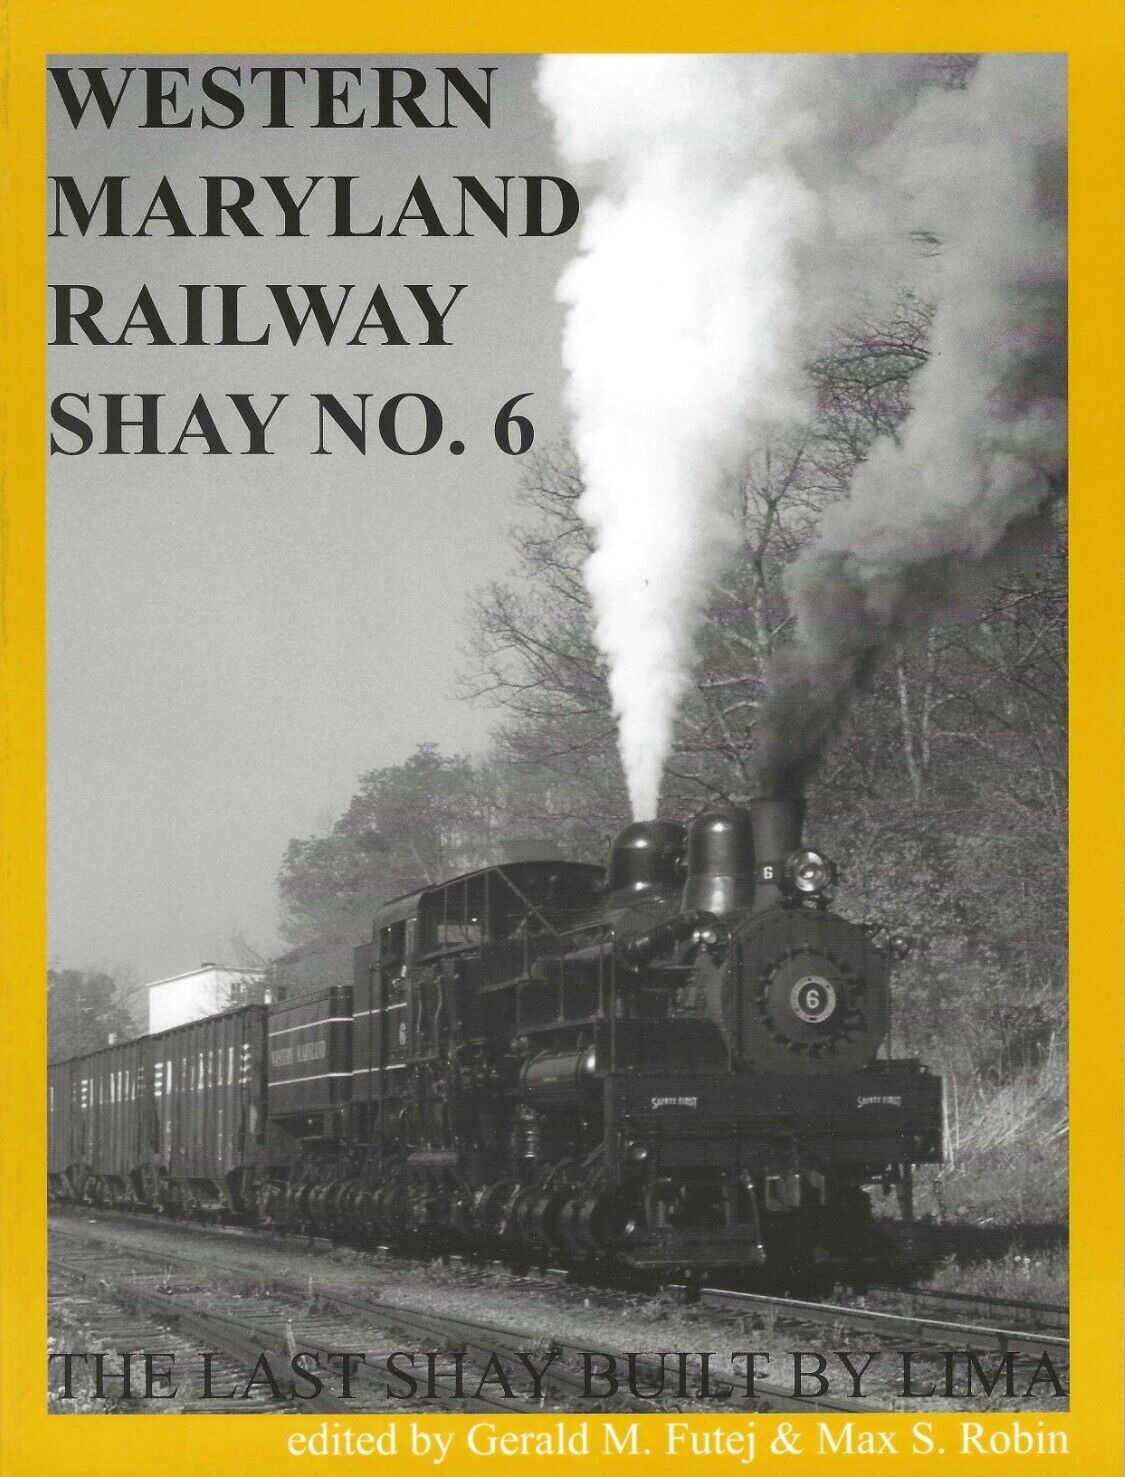 WESTERN MARYLAND RAILWAY Shay No. 6 - The Last Shay Built by LIMA - (NEW BOOK)